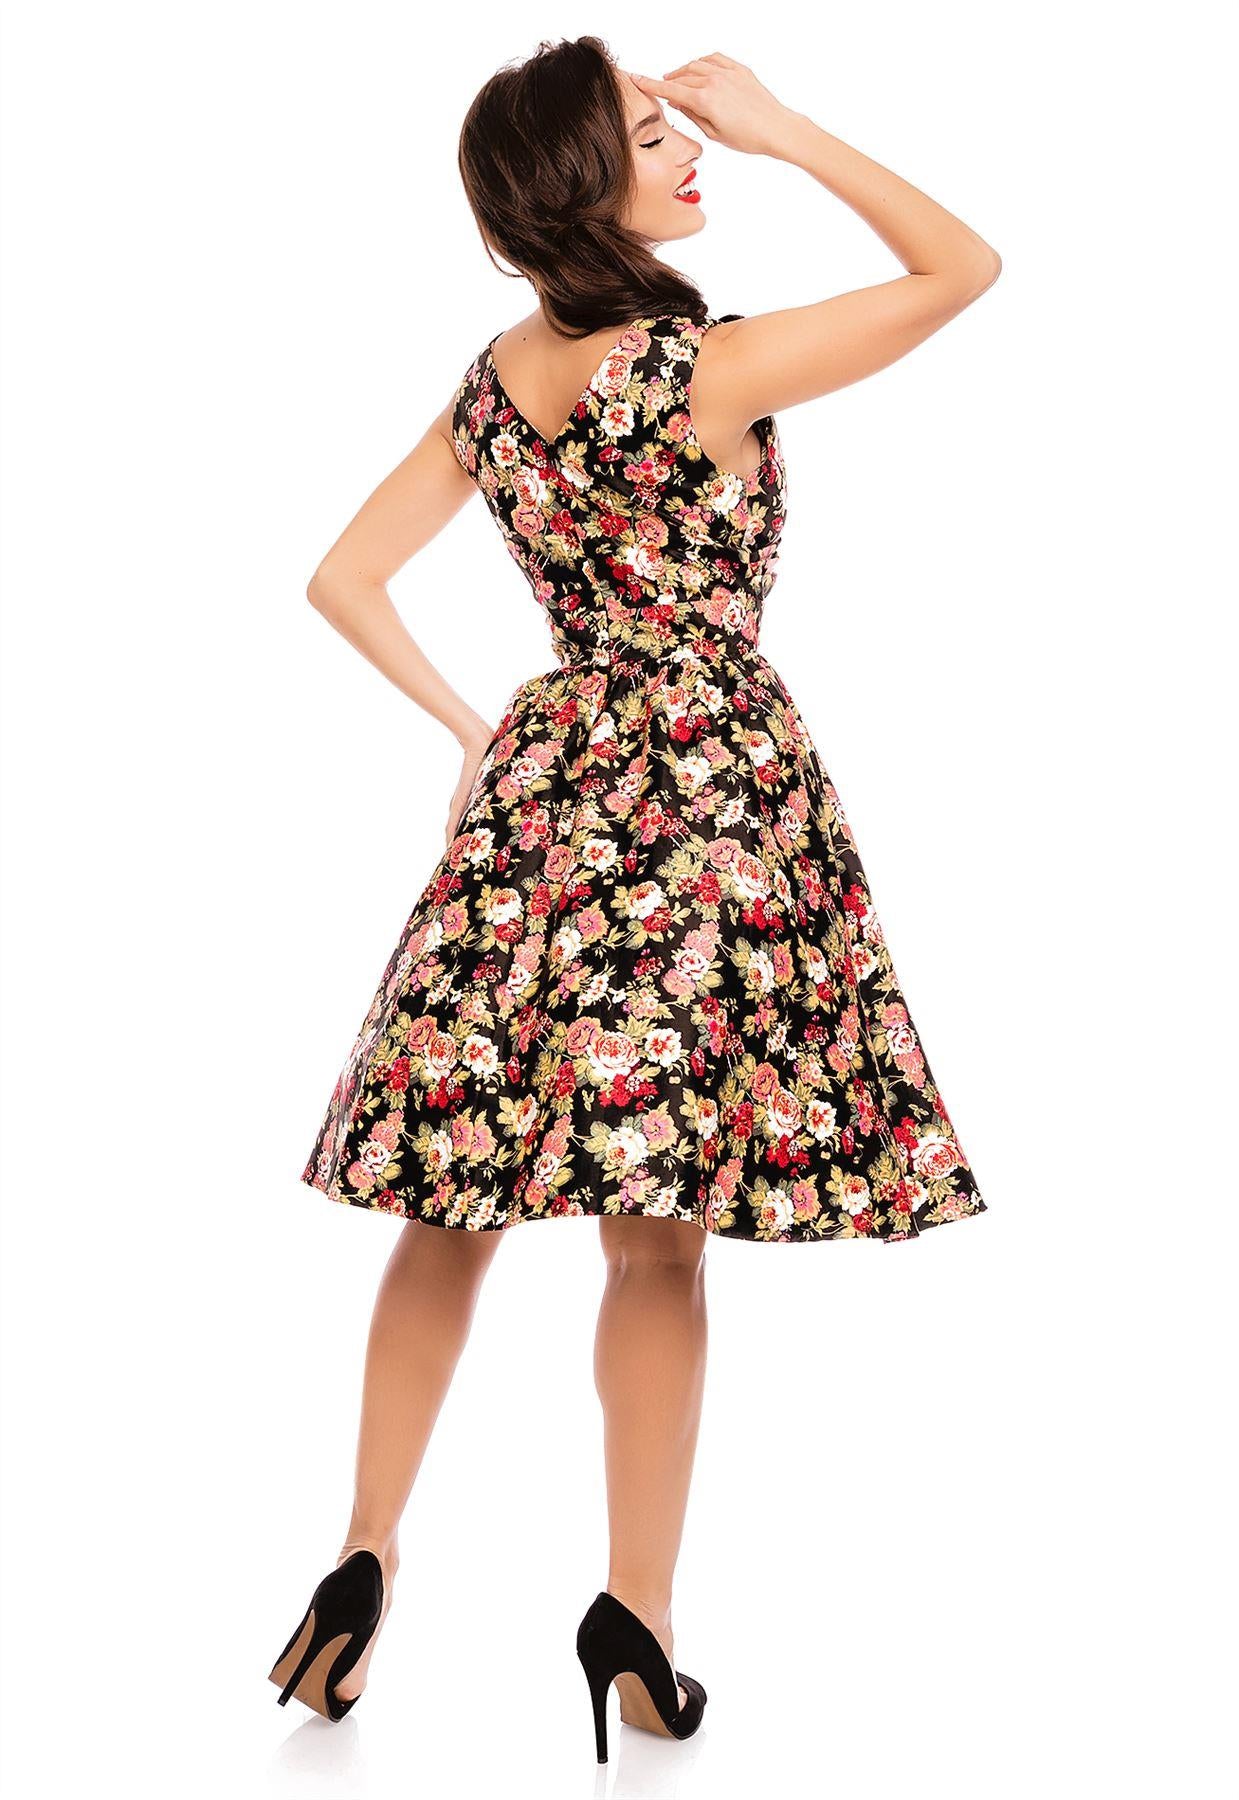 Model wearing our crossover bust May dress, in black/pink floral print, back view